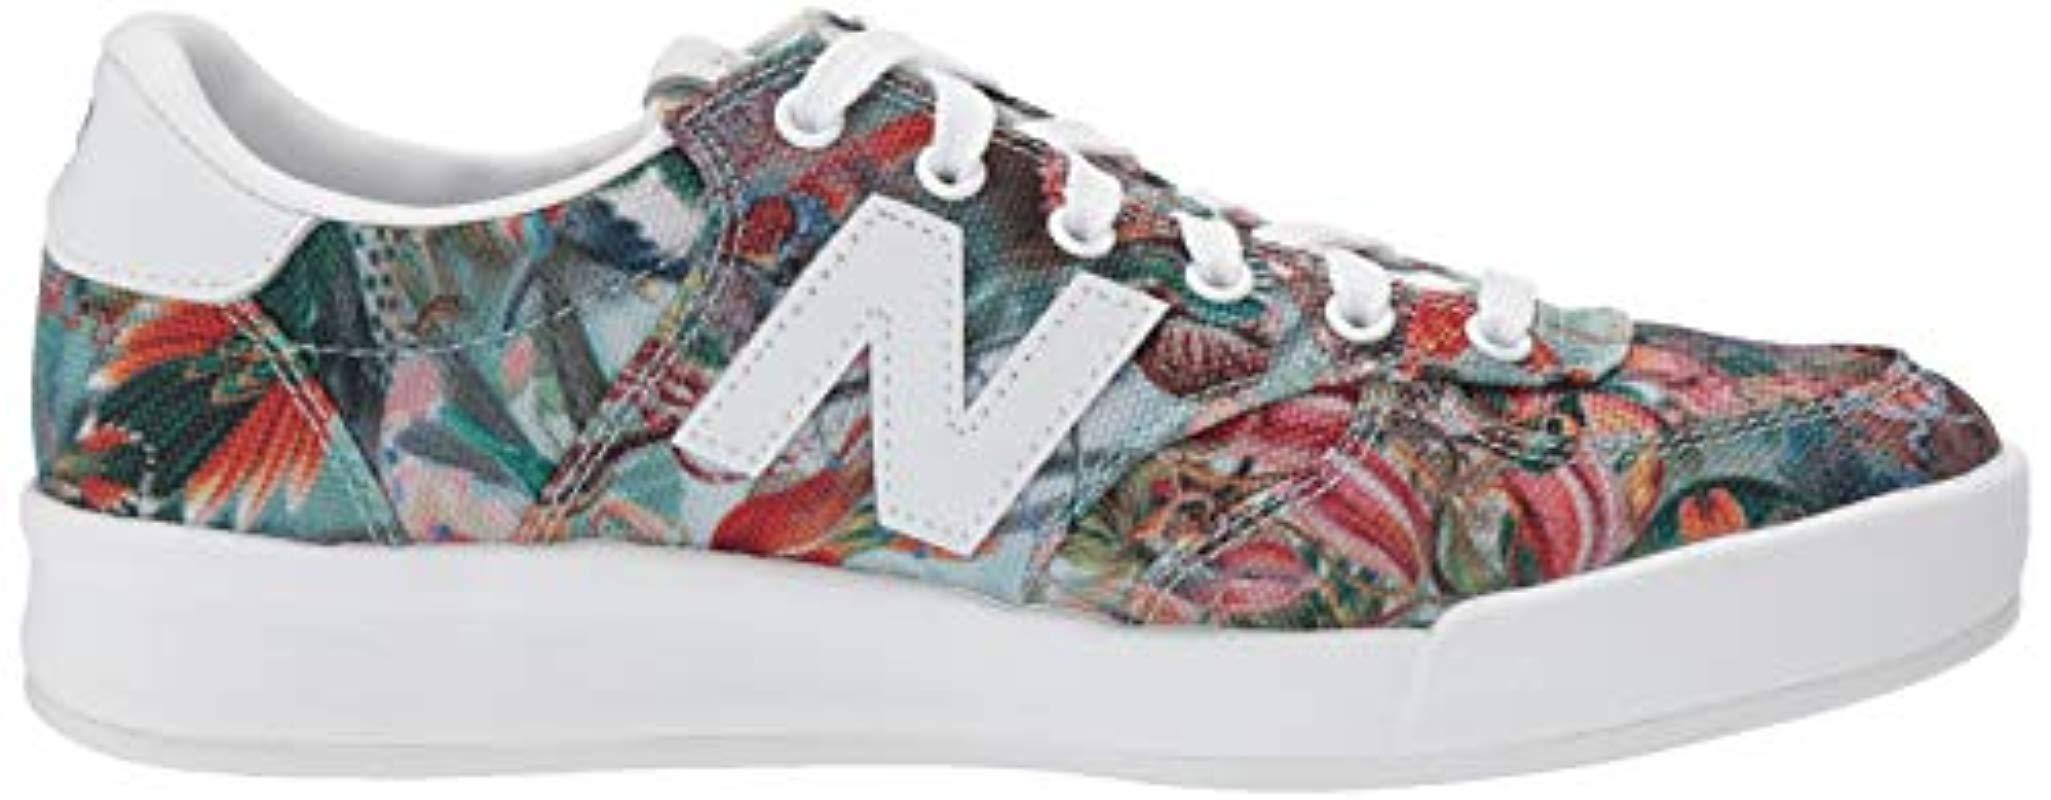 New Balance Canvas Wrt300 Trainers in Print/White (White) - Lyst